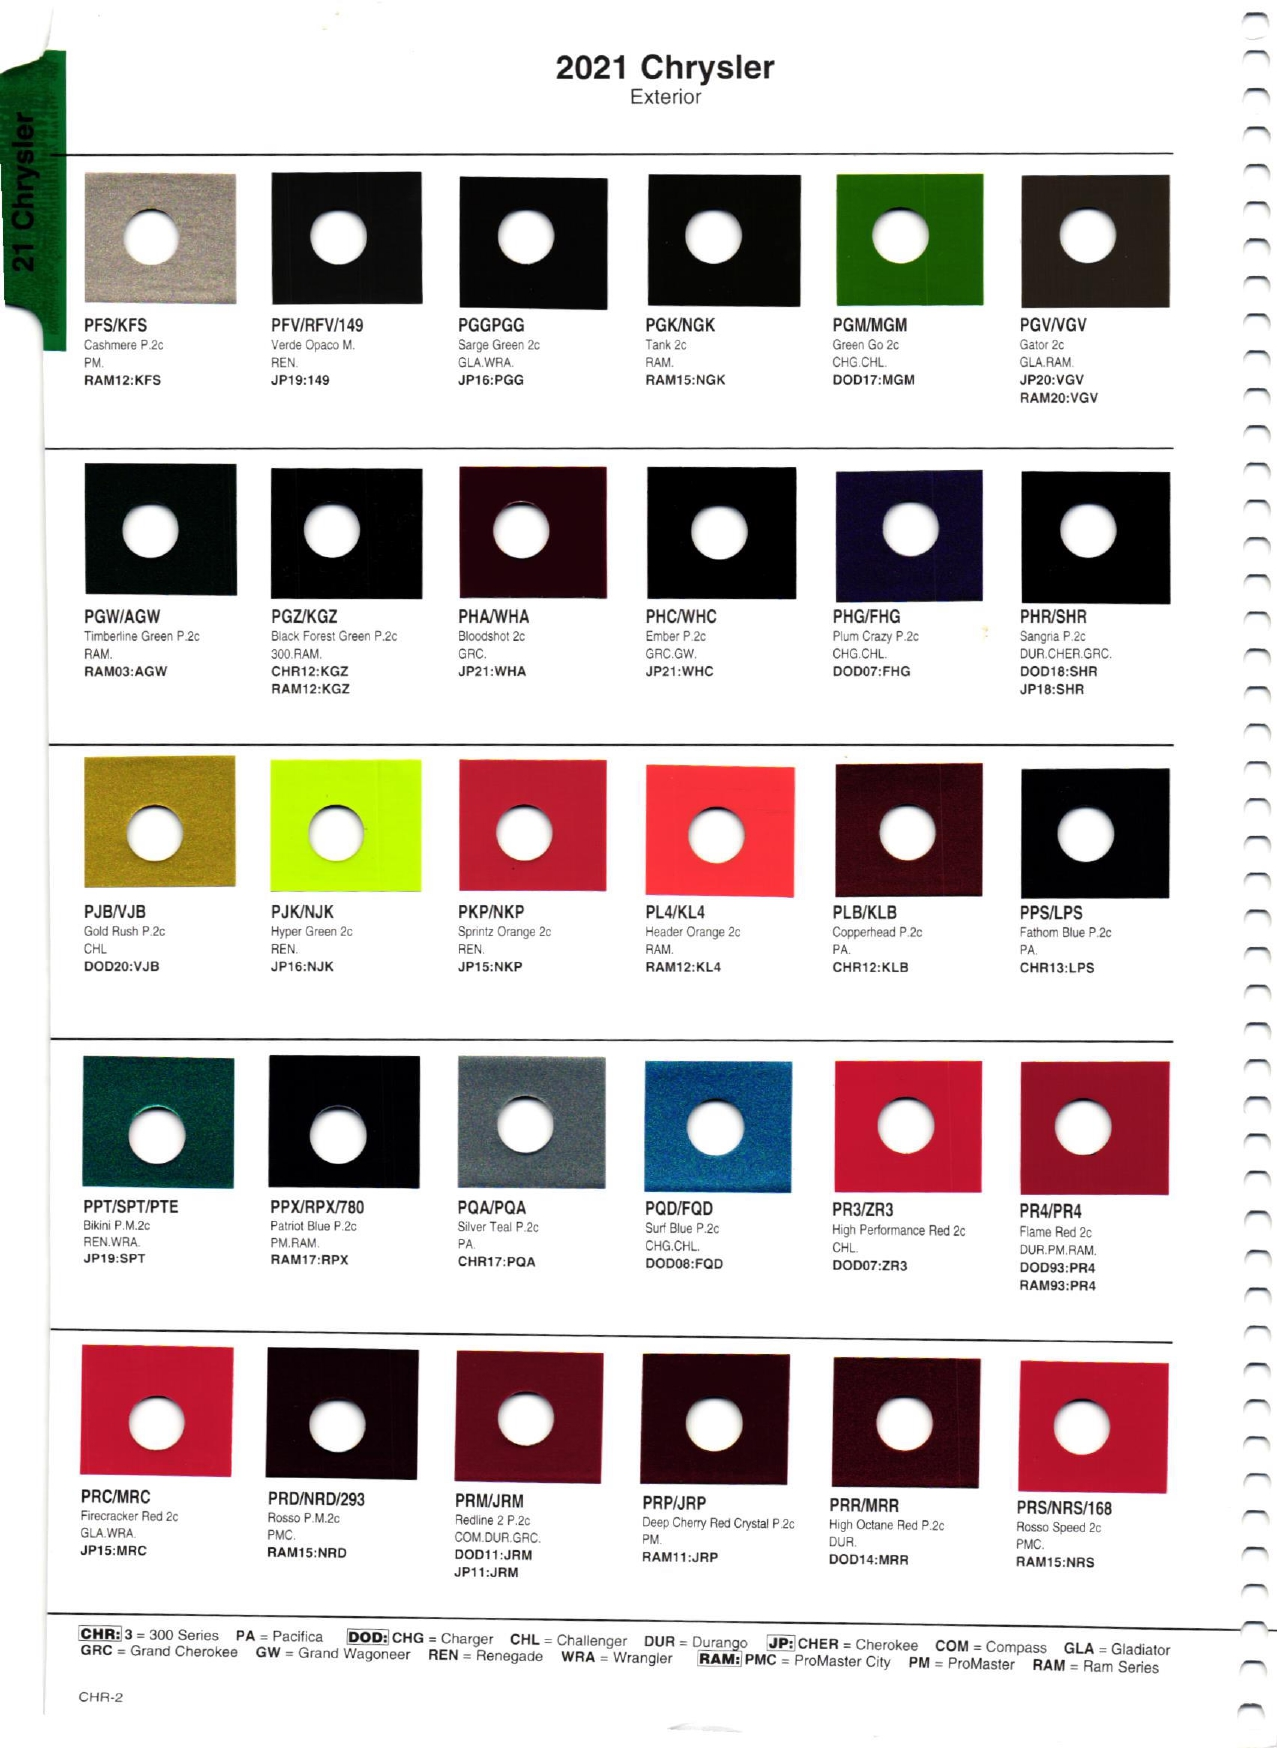 Color Codes and Paint Swatch Examples on 2021 Chrysler, Dodge, and Jeep Vehicles